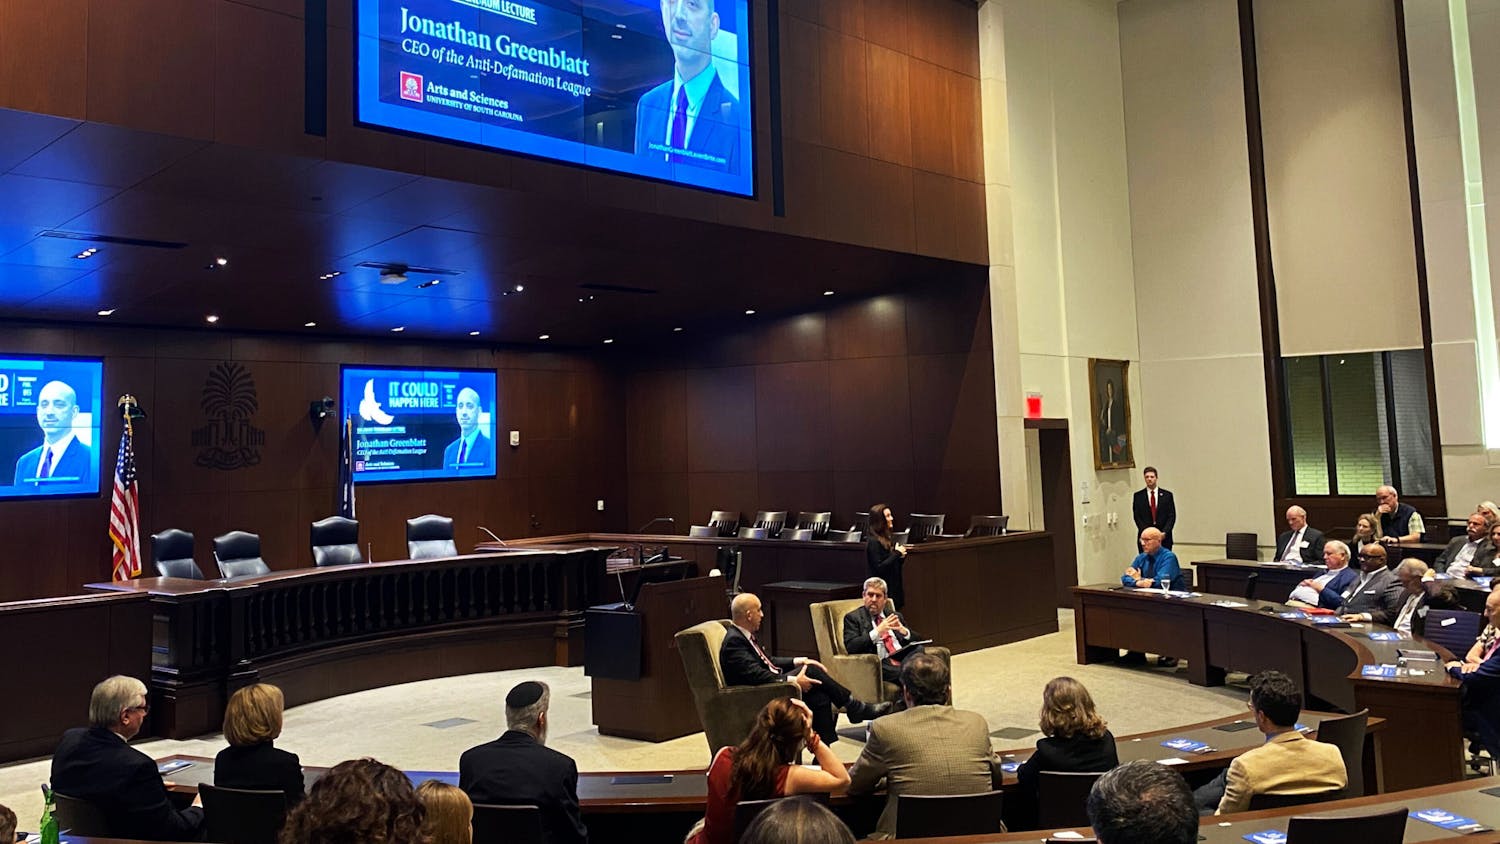 Jonathan Greenblatt, the CEO of the Anti-Defamation League, presents the 2023 Solomon-Tenenbaum Lecture at the University of South Carolina School of Law on Feb. 16, 2023. The lecture talked about anti-Semitism in America and how people can stand against tolerance of it.